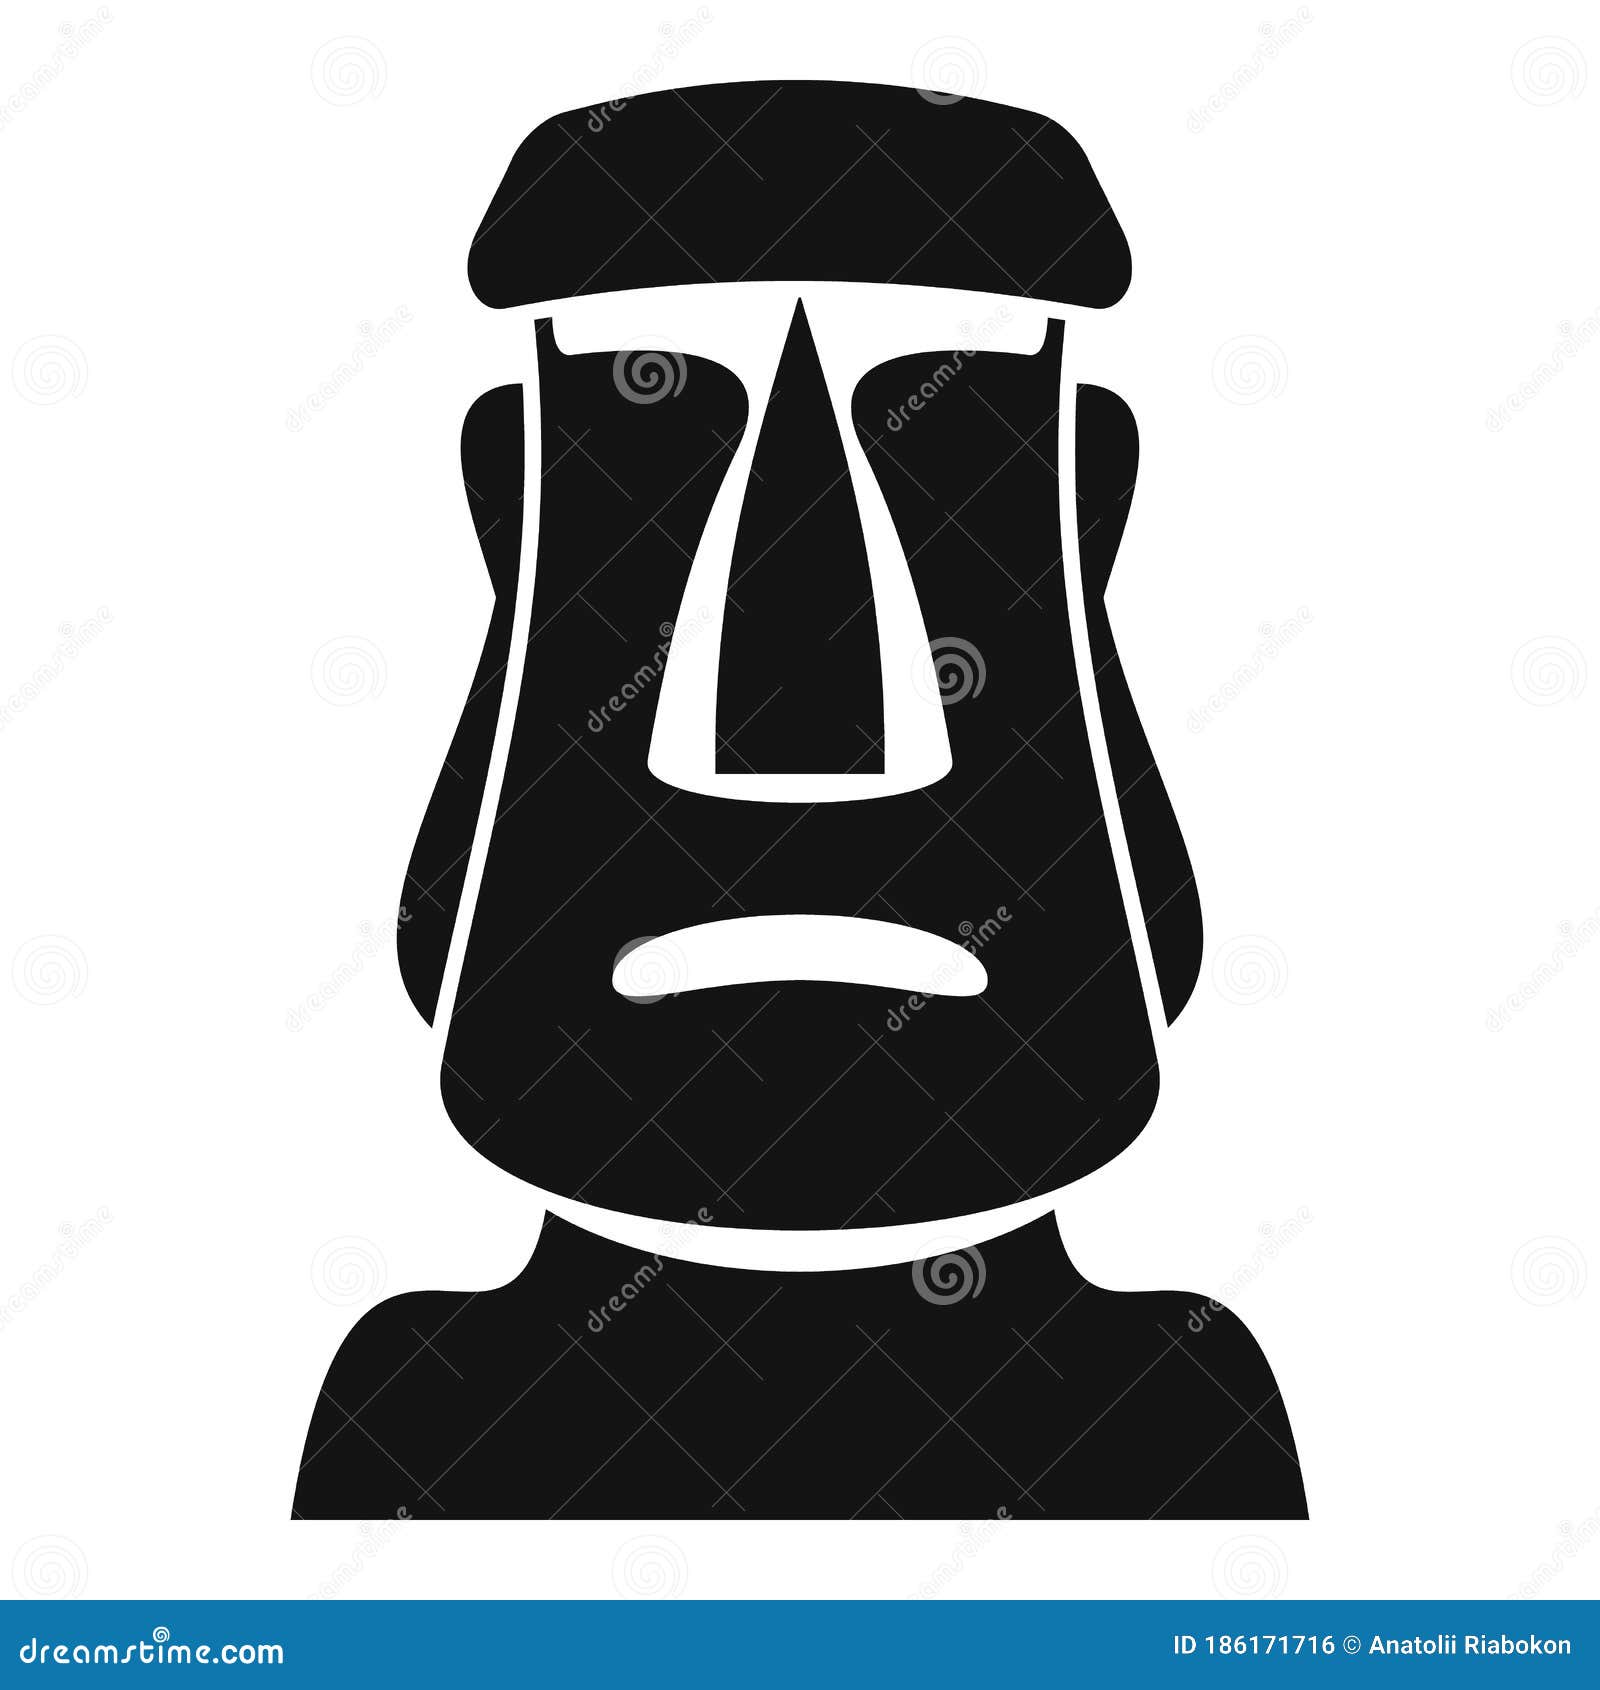 Moai Icon - Download in Line Style